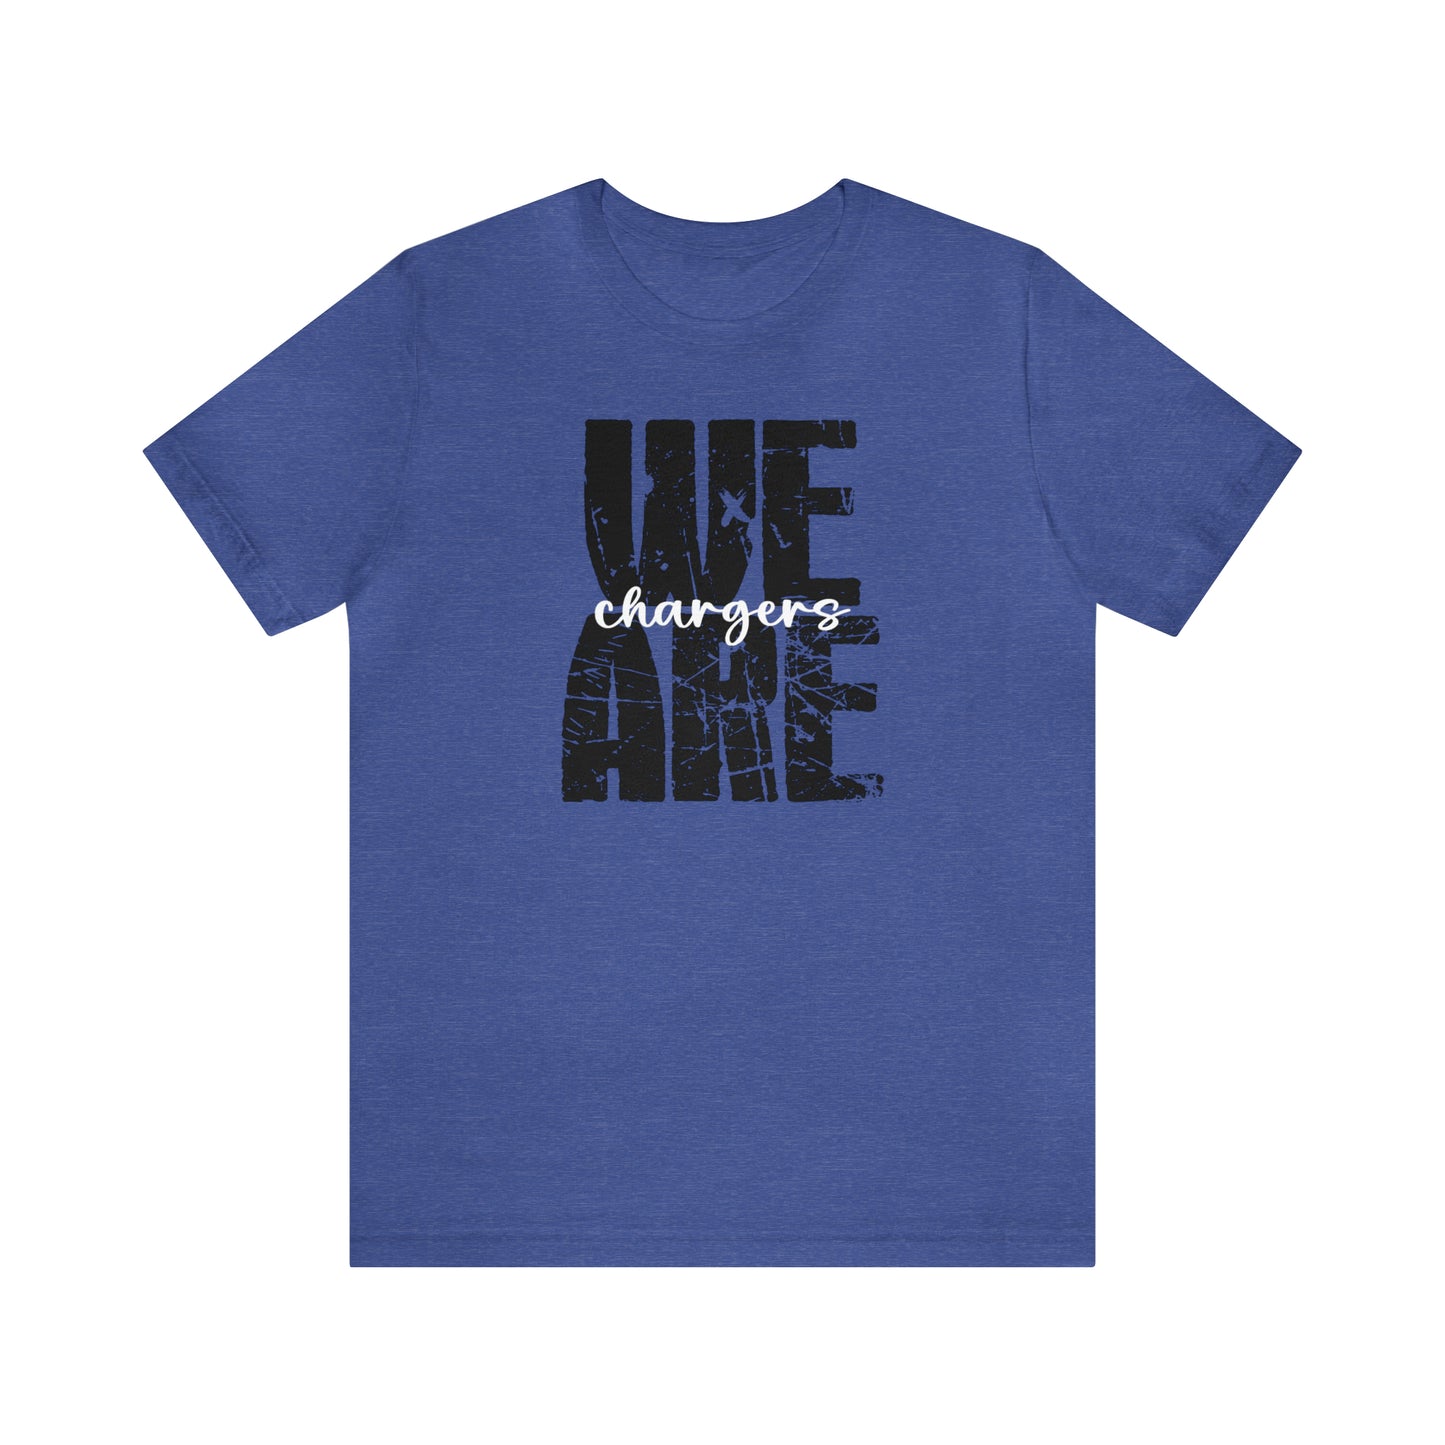 We Are Chargers - Bella Canvas Short Sleeve Tee